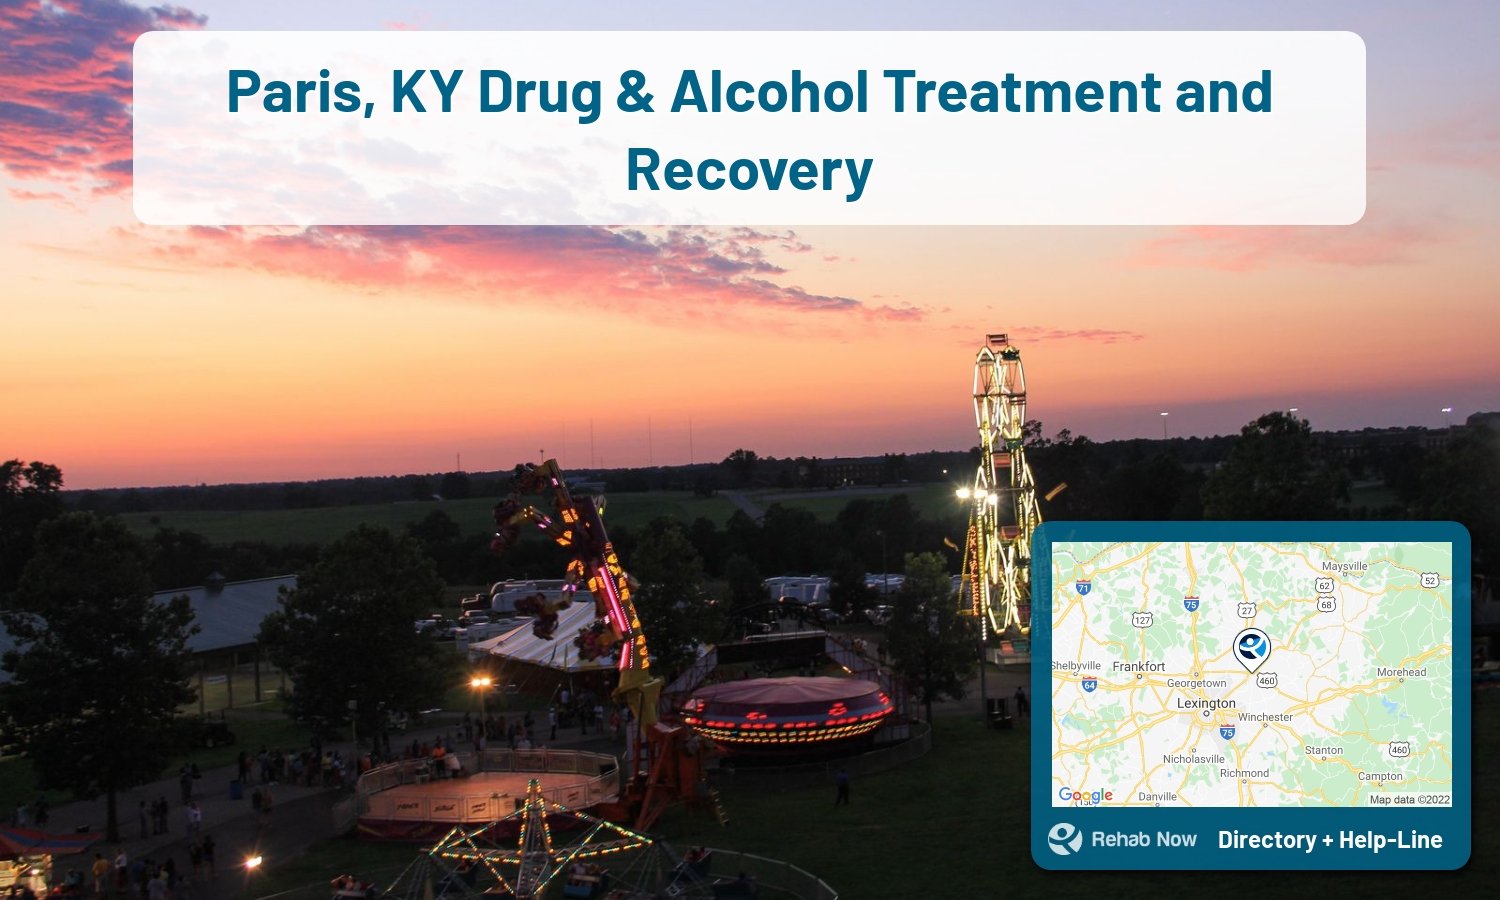 View options, availability, treatment methods, and more, for drug rehab and alcohol treatment in Paris, Kentucky